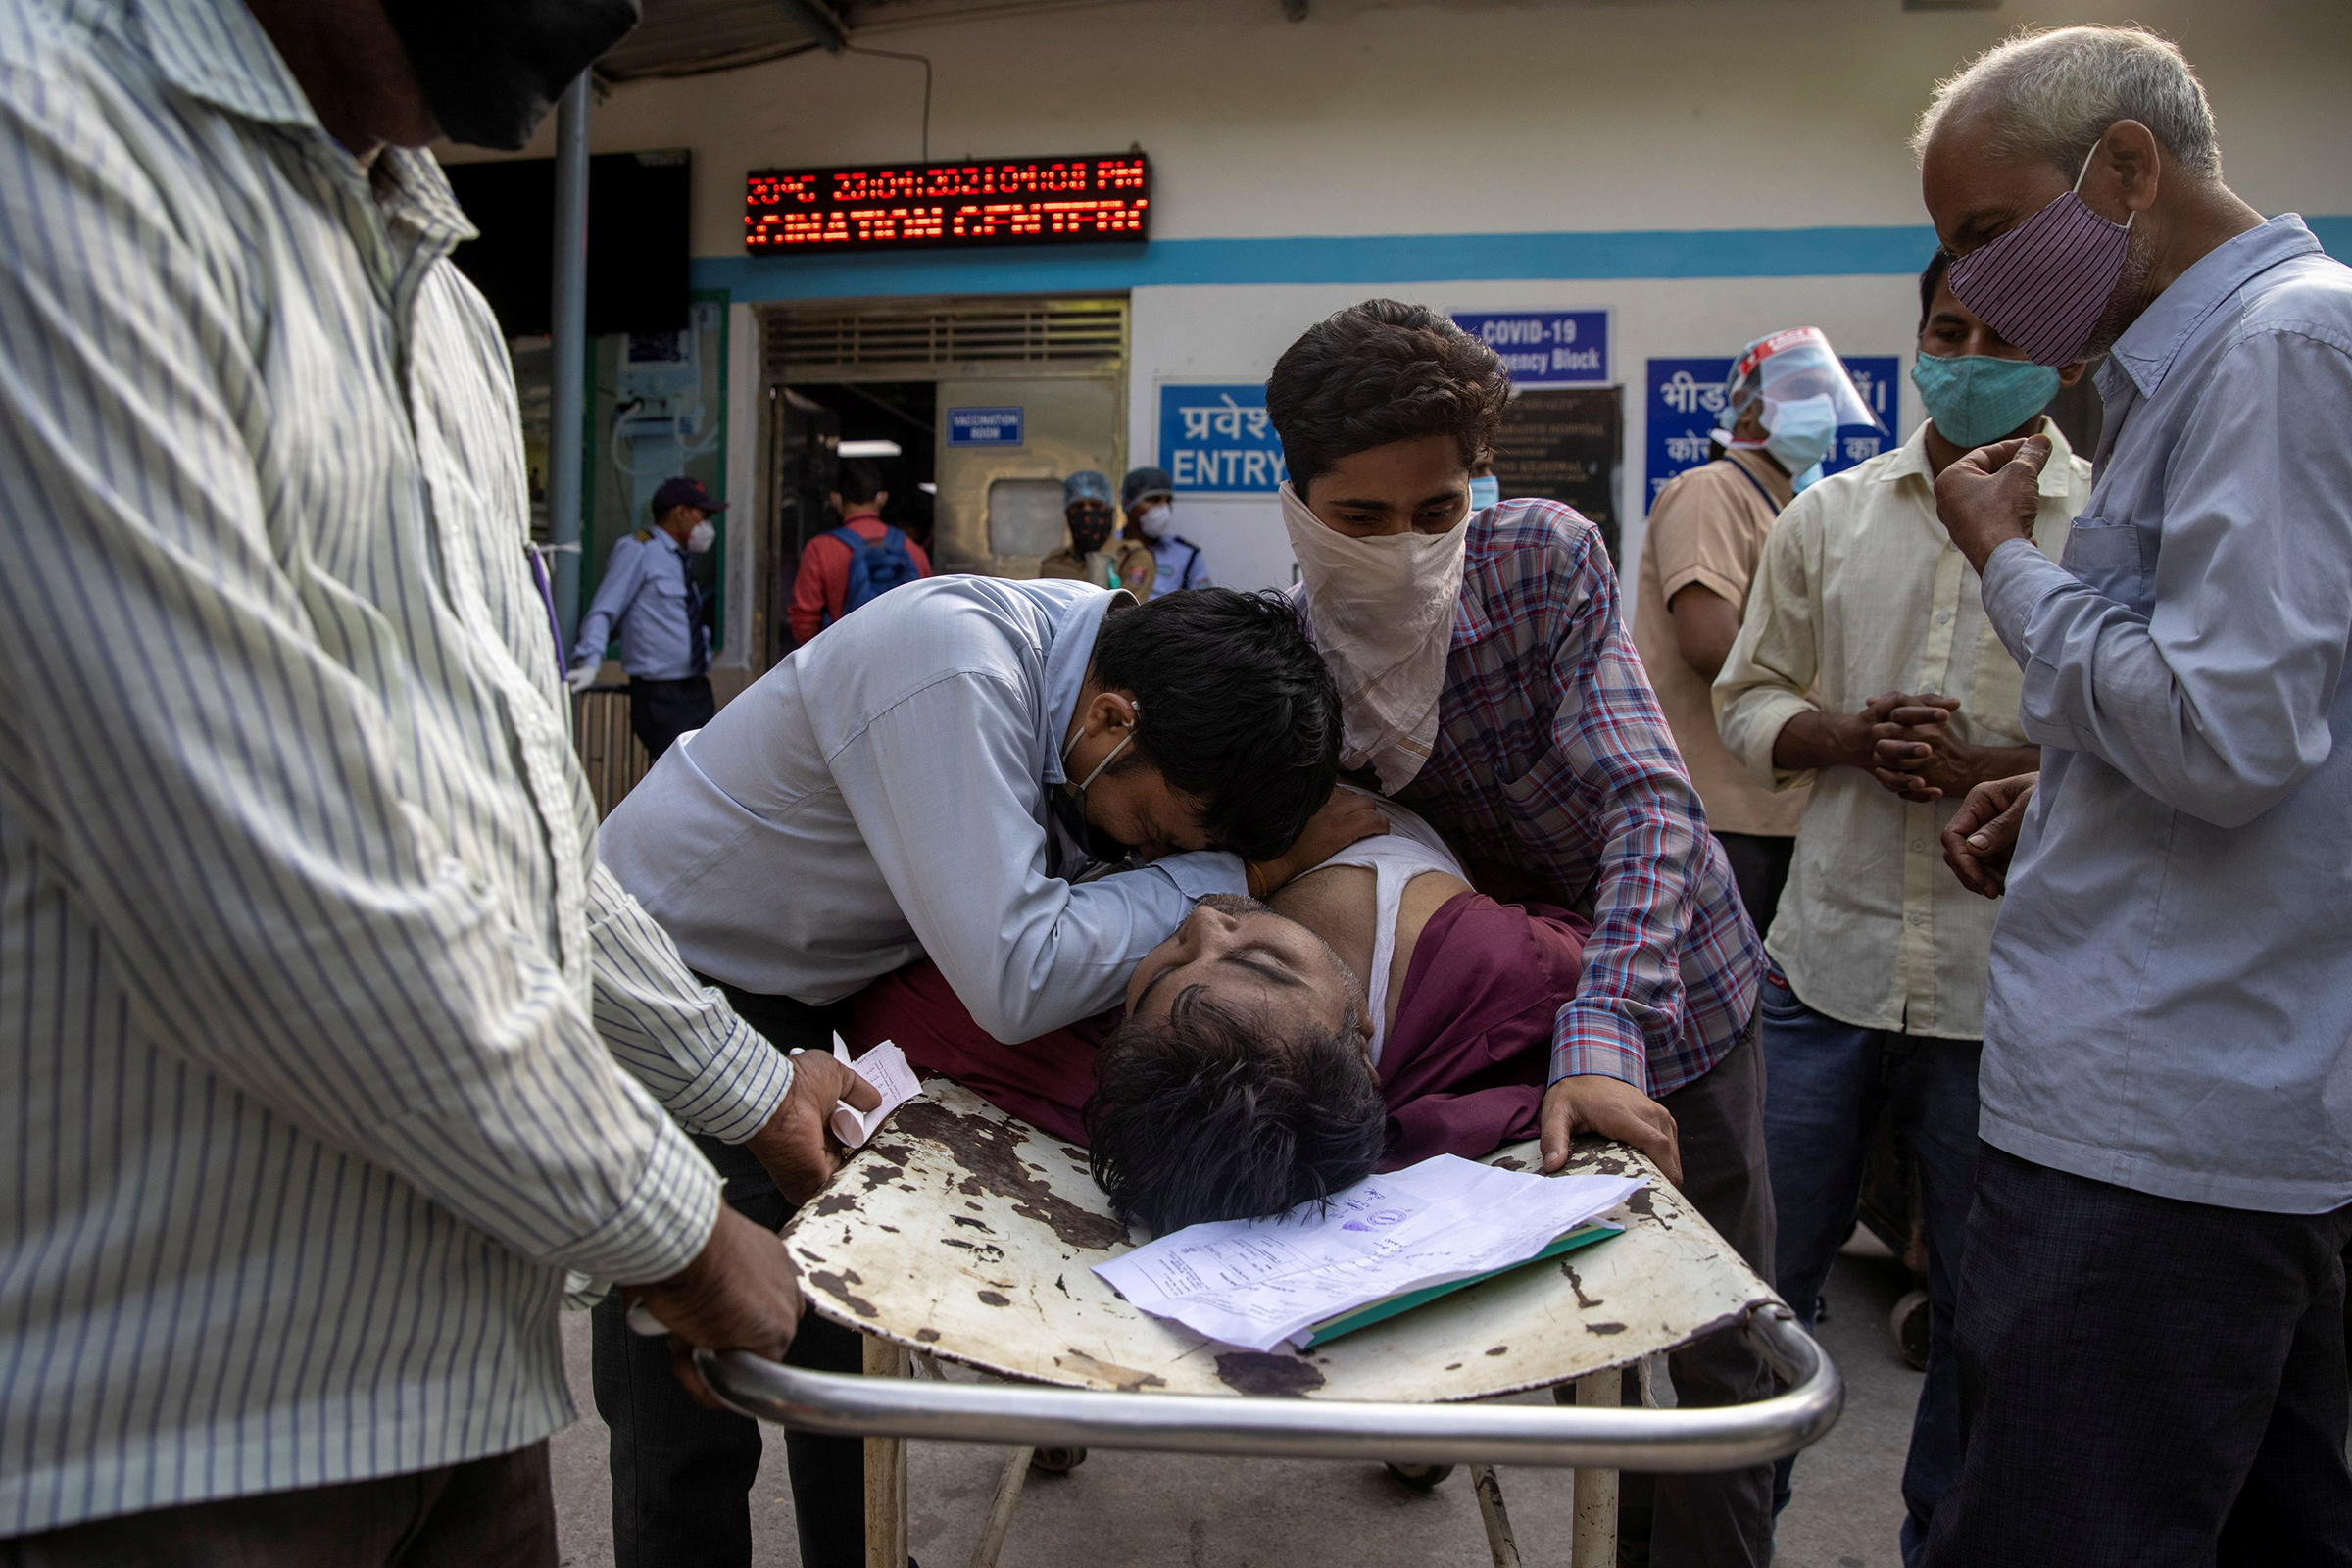 Family members mourn after Shayam Narayan, a 45-year-old COVID-19 patient and father of five, is declared dead outside the COVID-19 casualty ward at Guru Teg Bahadur Hospital in Delhi on April 23. (Danish Siddiqui—Reuters)